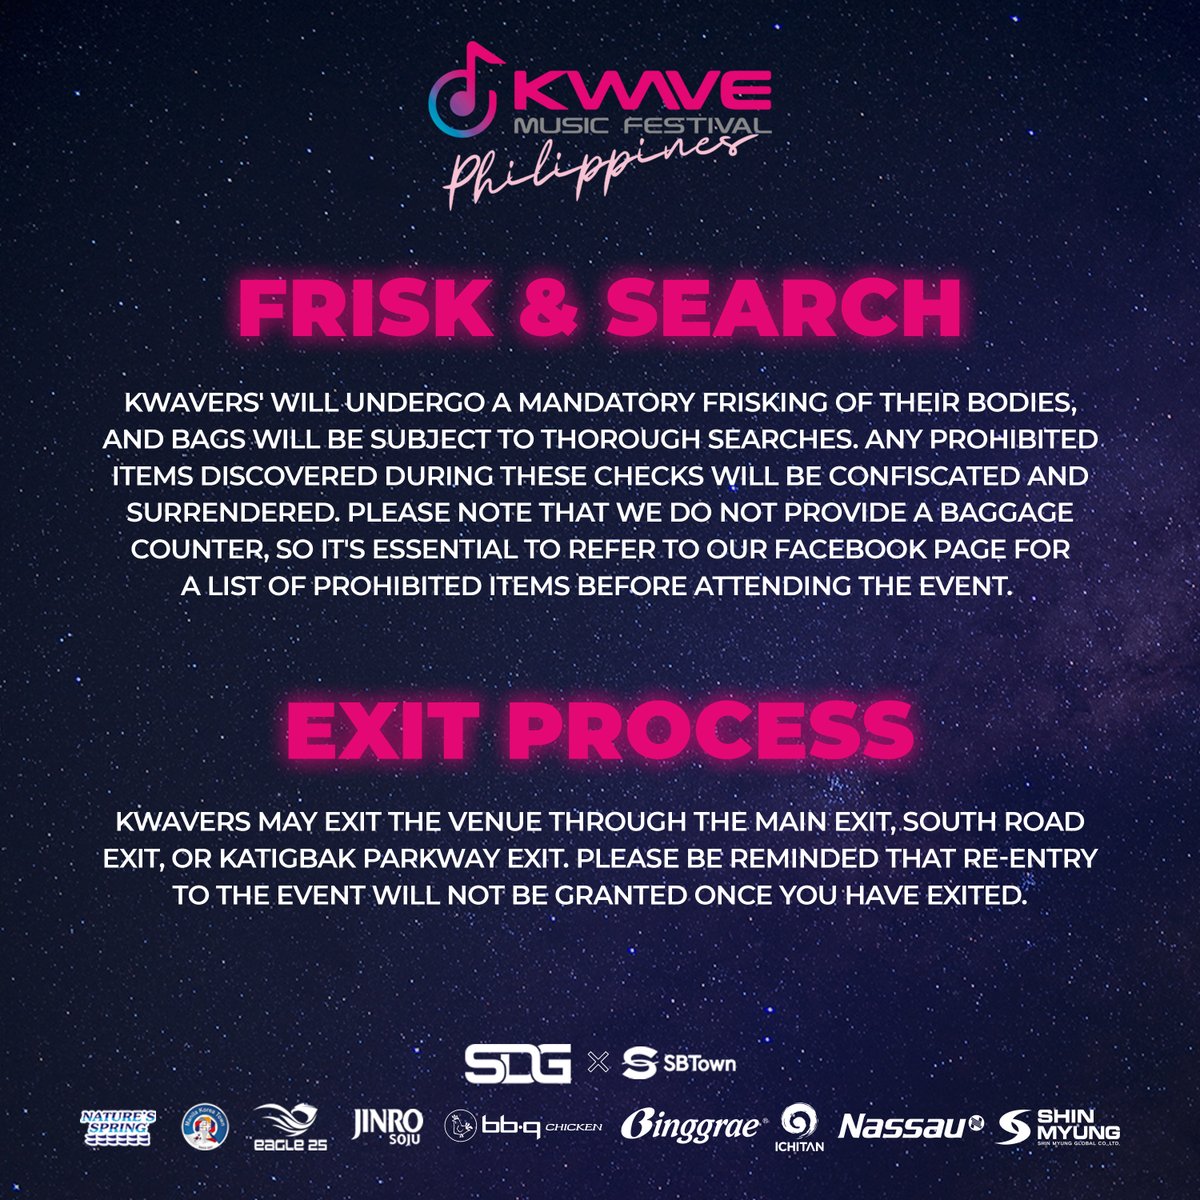 Still feeling lost, KWAVERS? 😵‍💫

Take a moment to jot down these pre-event reminders to navigate the big day like a pro! ✍️

#THEBOYZ #fromis_9 #PLUUS #YGIG #YARA #KAIA #KWAVEPH #AbsolutelyLibre #KWAVEMusicFestival #BadmintonAsia #KWAVE